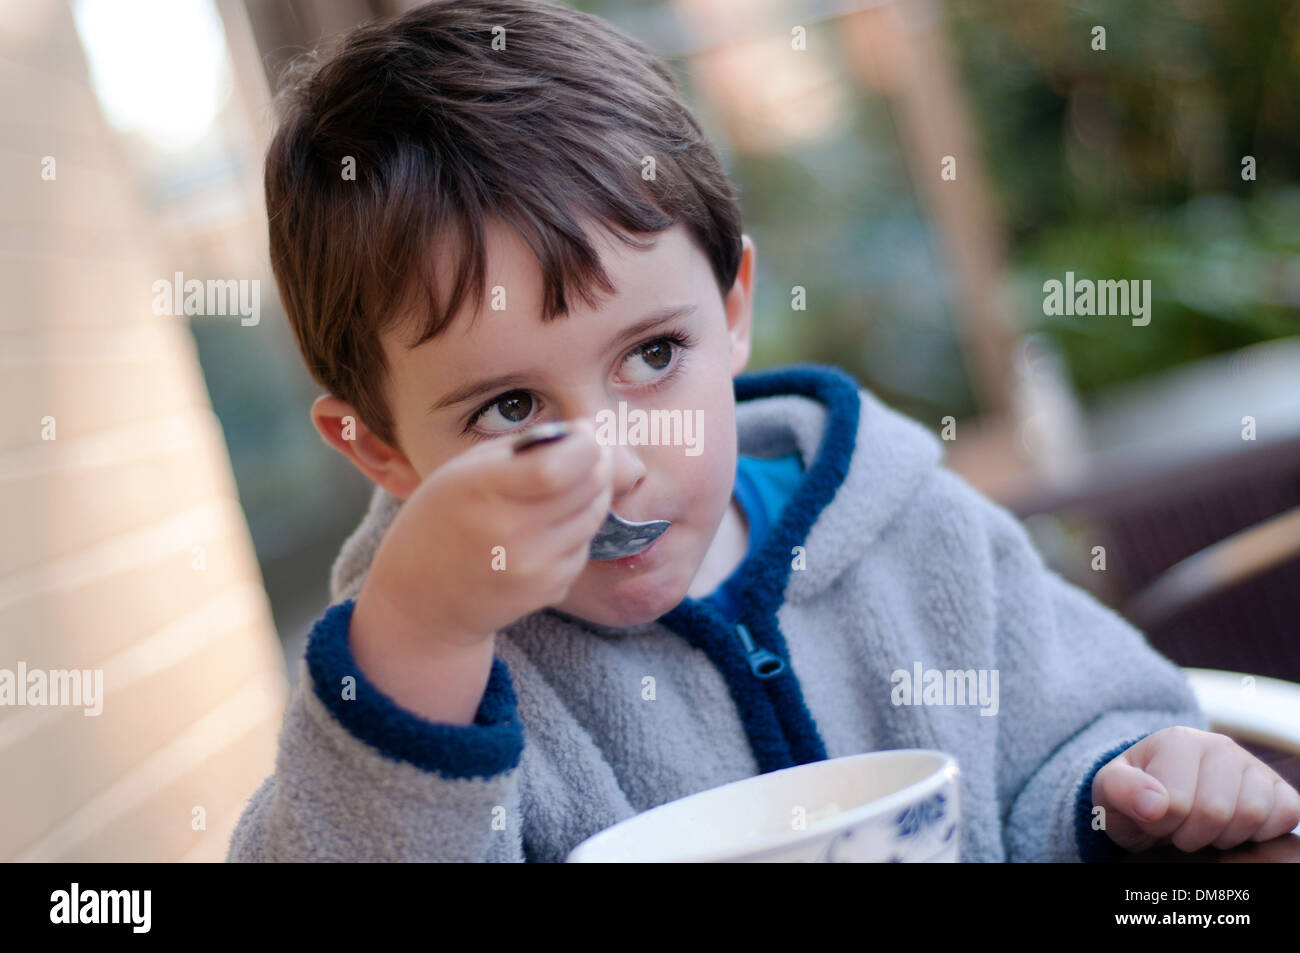 Four years old boy eating ice cream Stock Photo